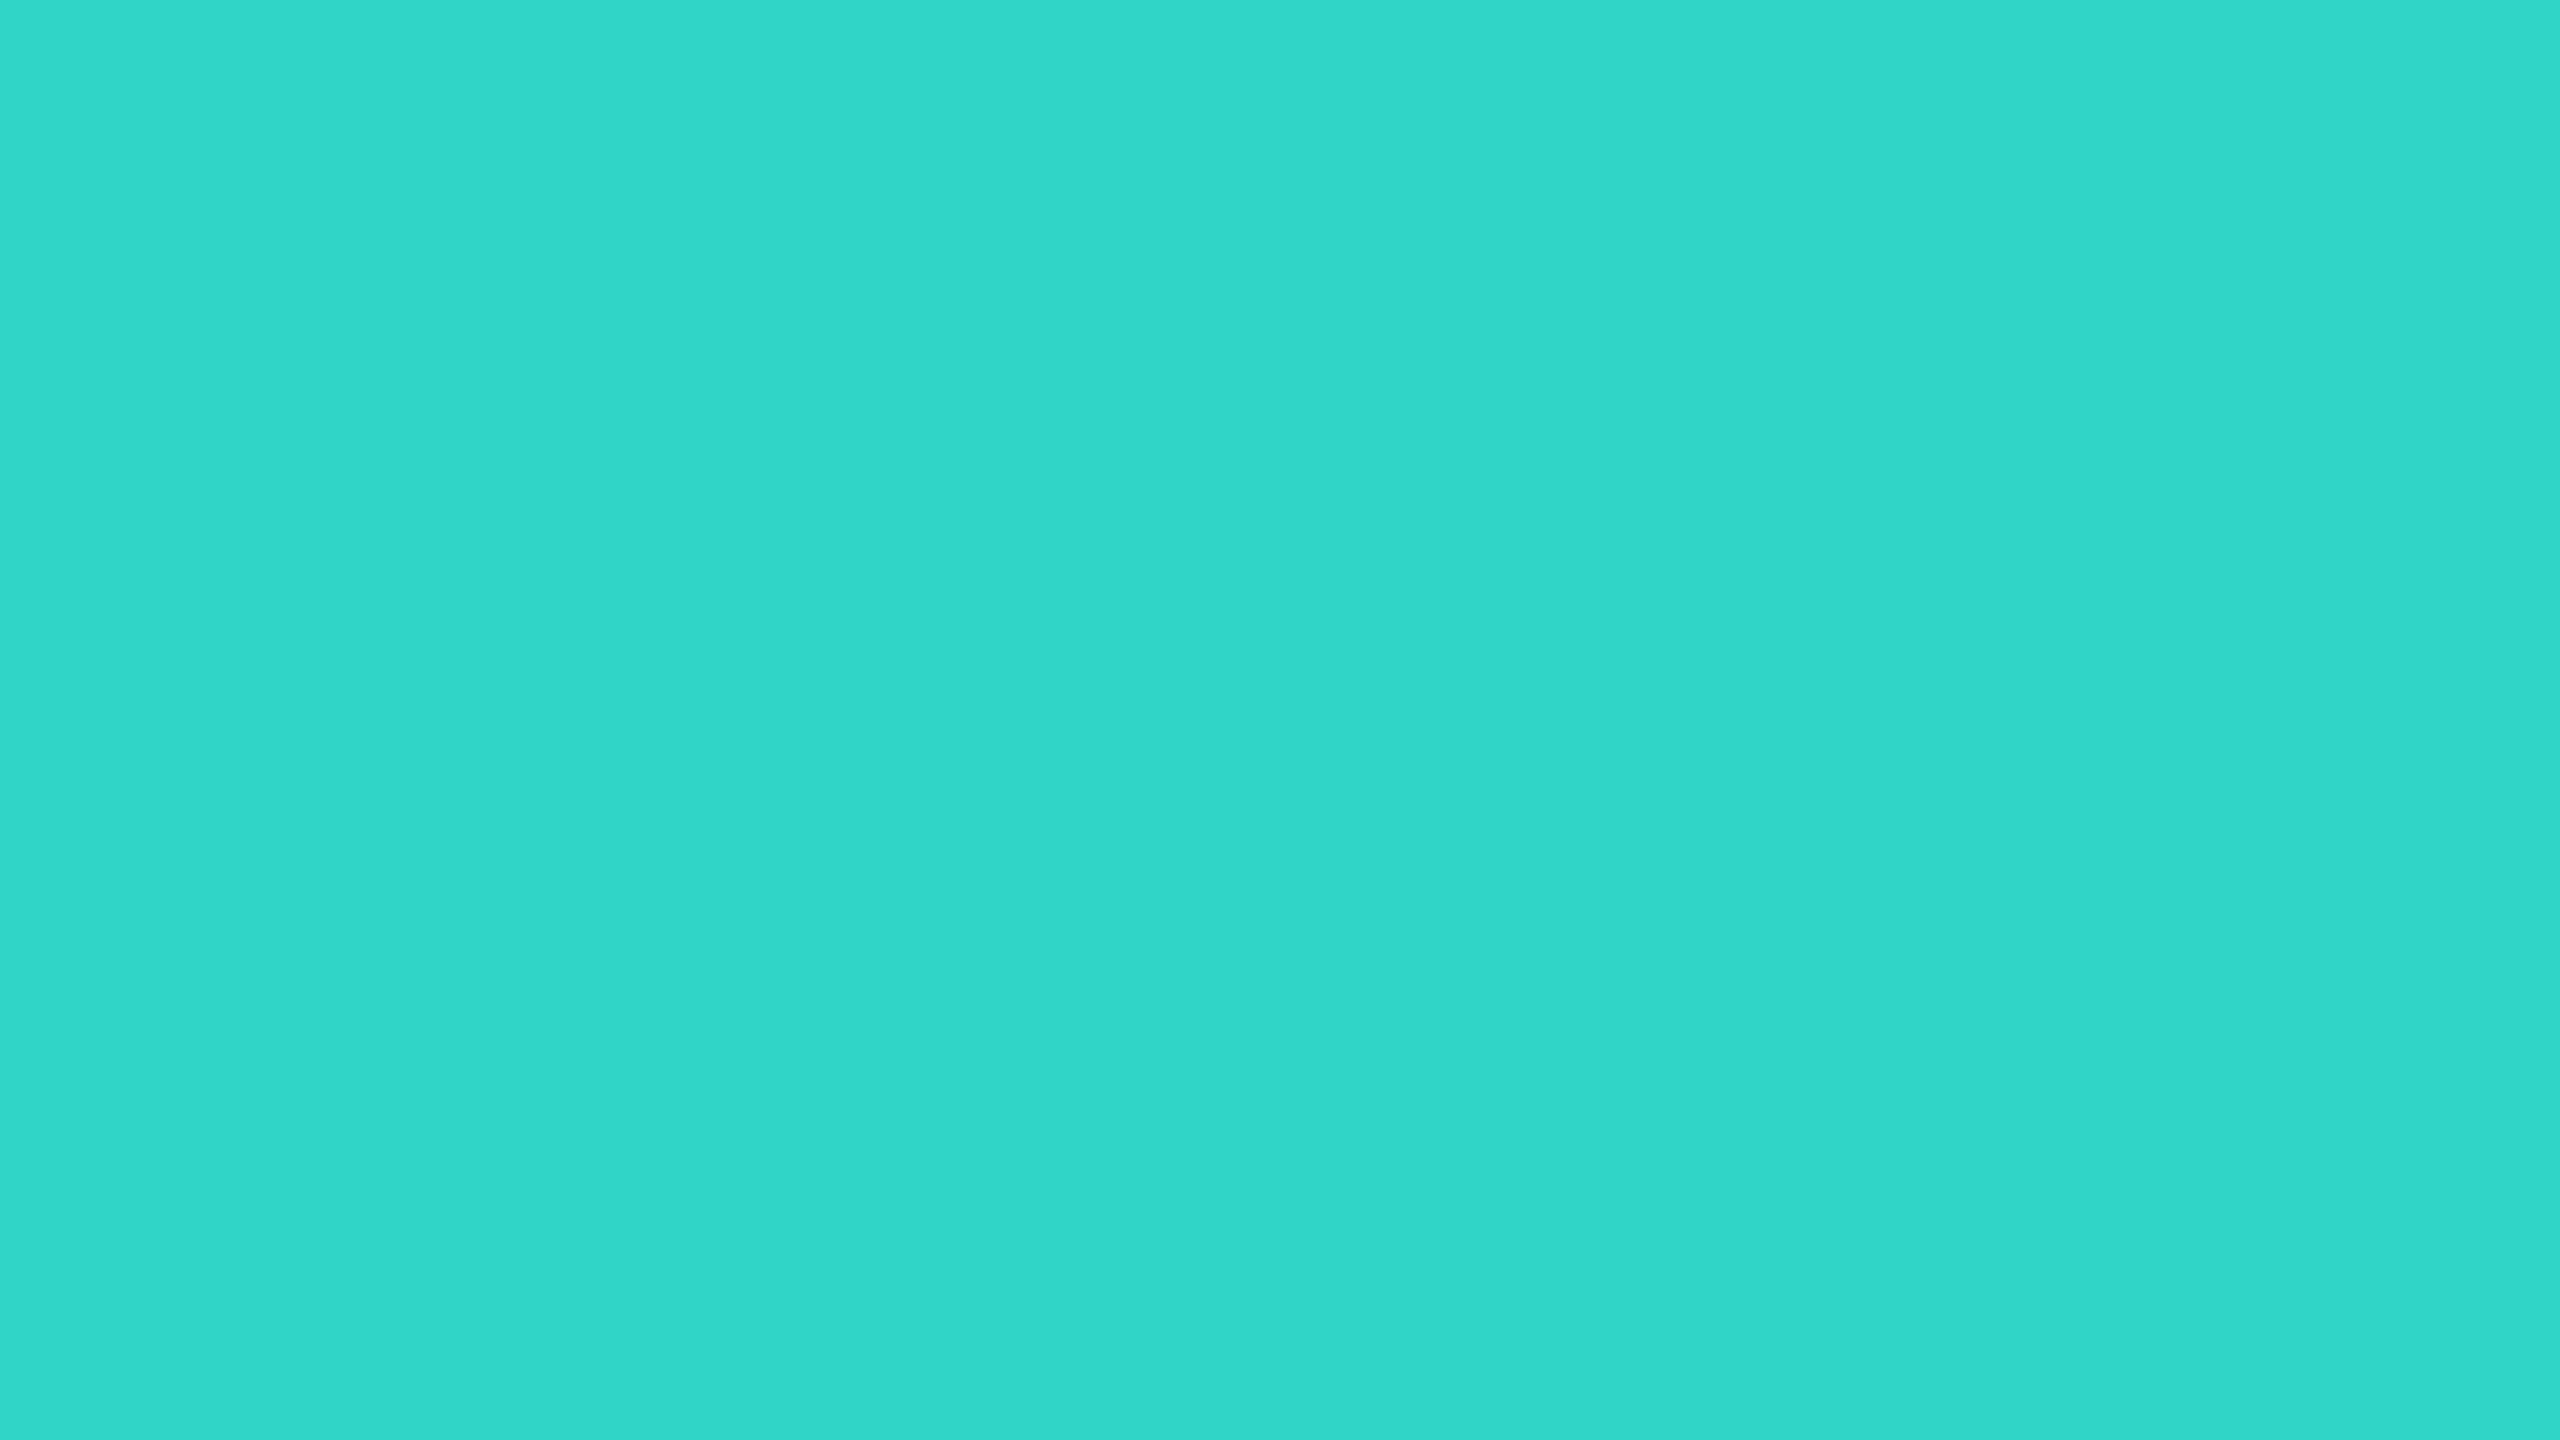 Images of Turquoise | 2560x1440